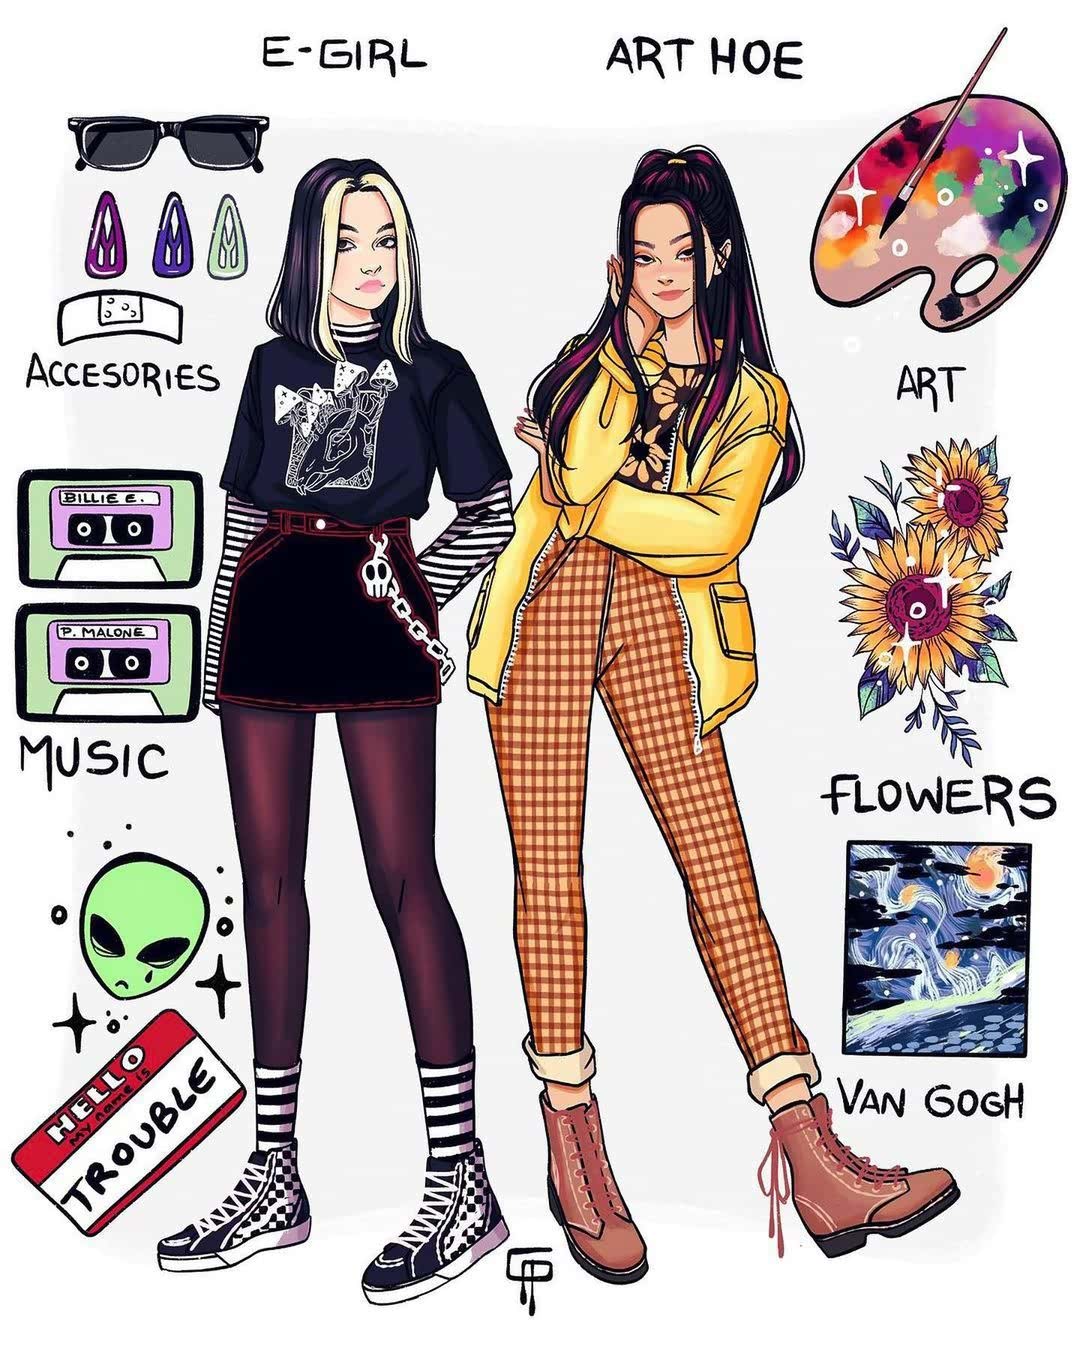 e girl and art hoe Top 20 Fashion Trends to Look Forward To for 2022